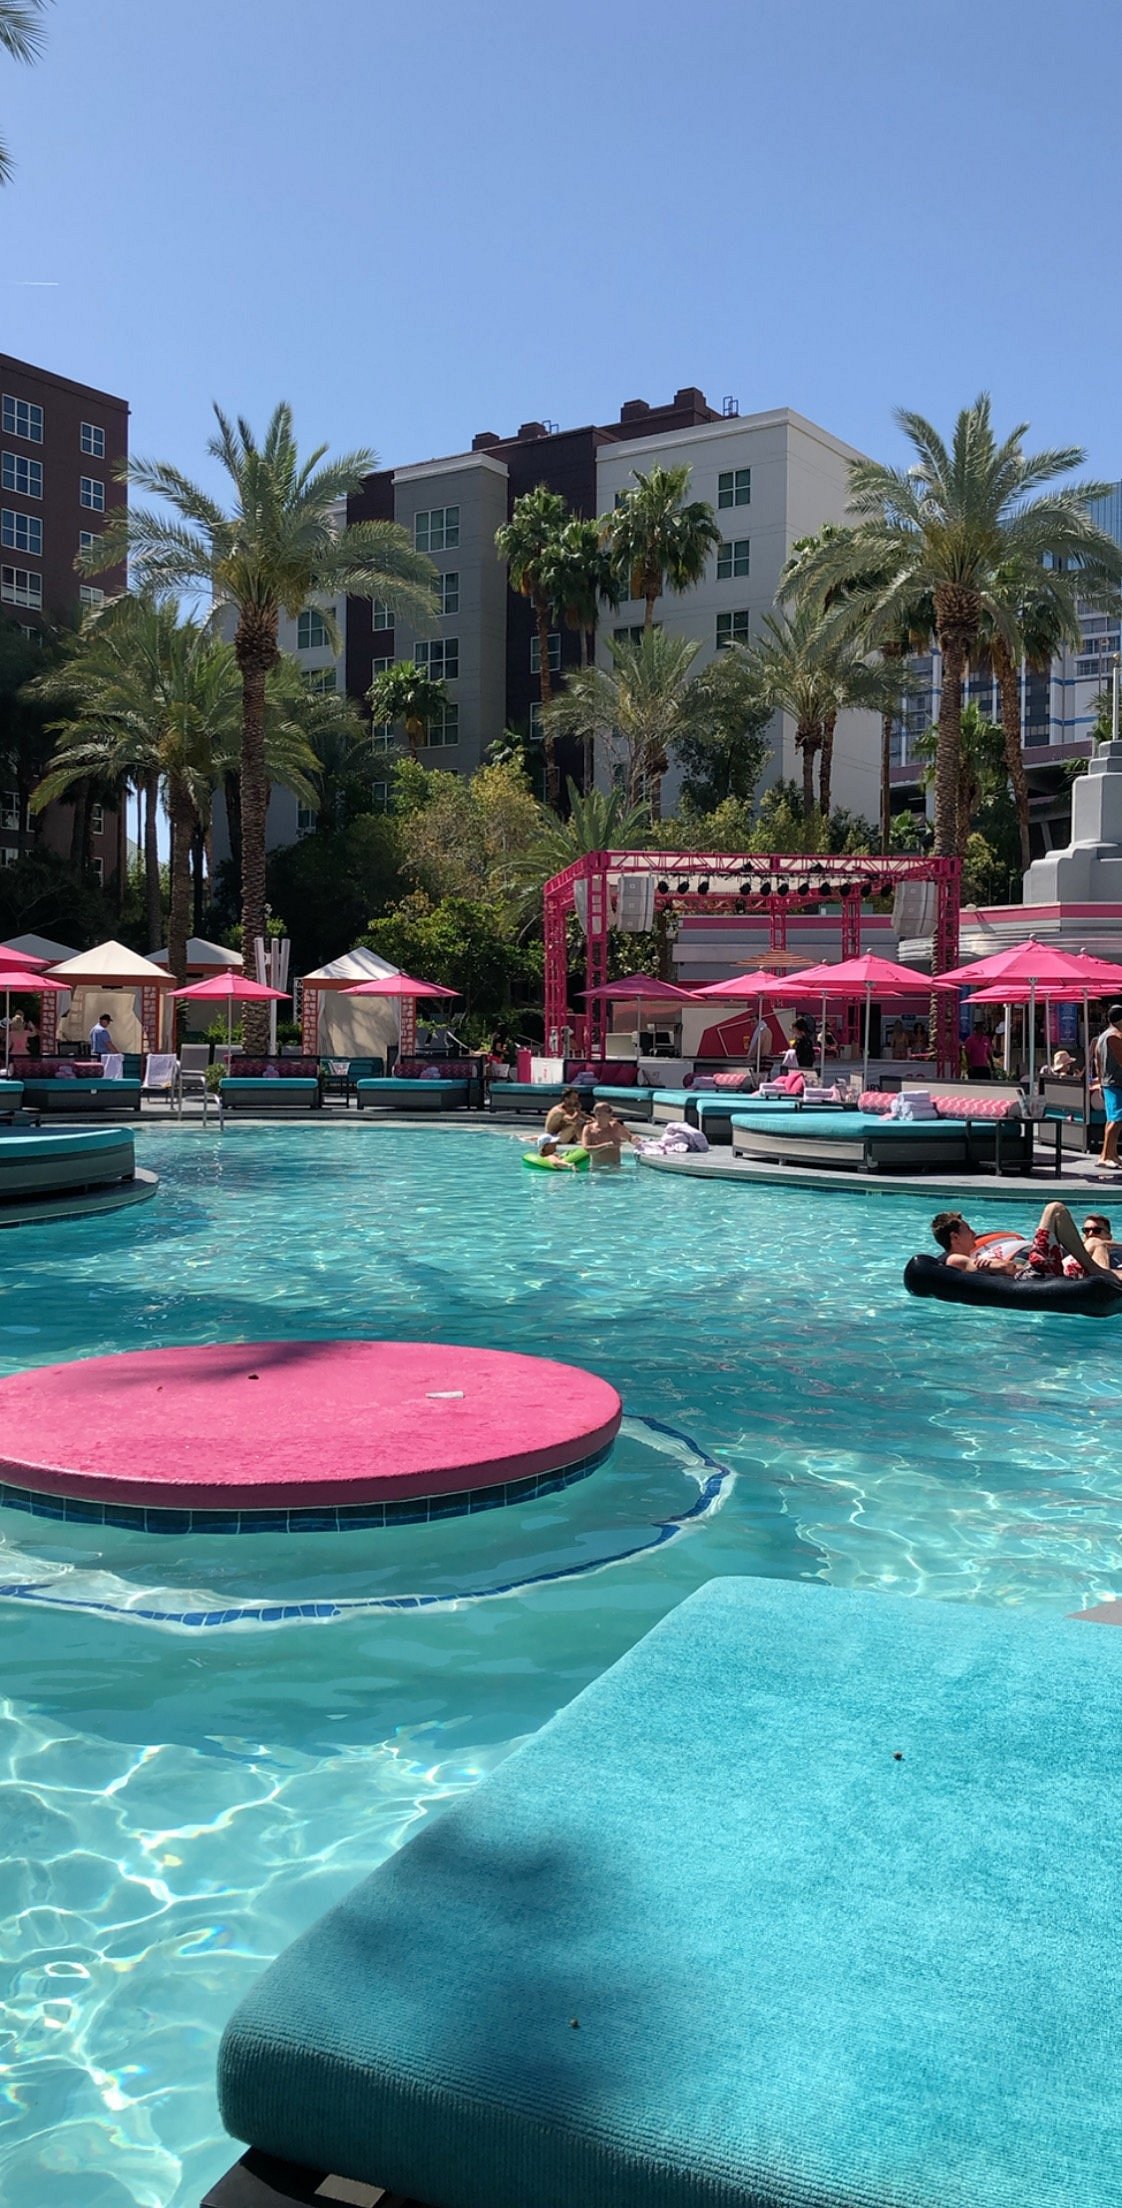 Flamingo Go Pool Las Vegas Review – Barnwood and Baked Goods